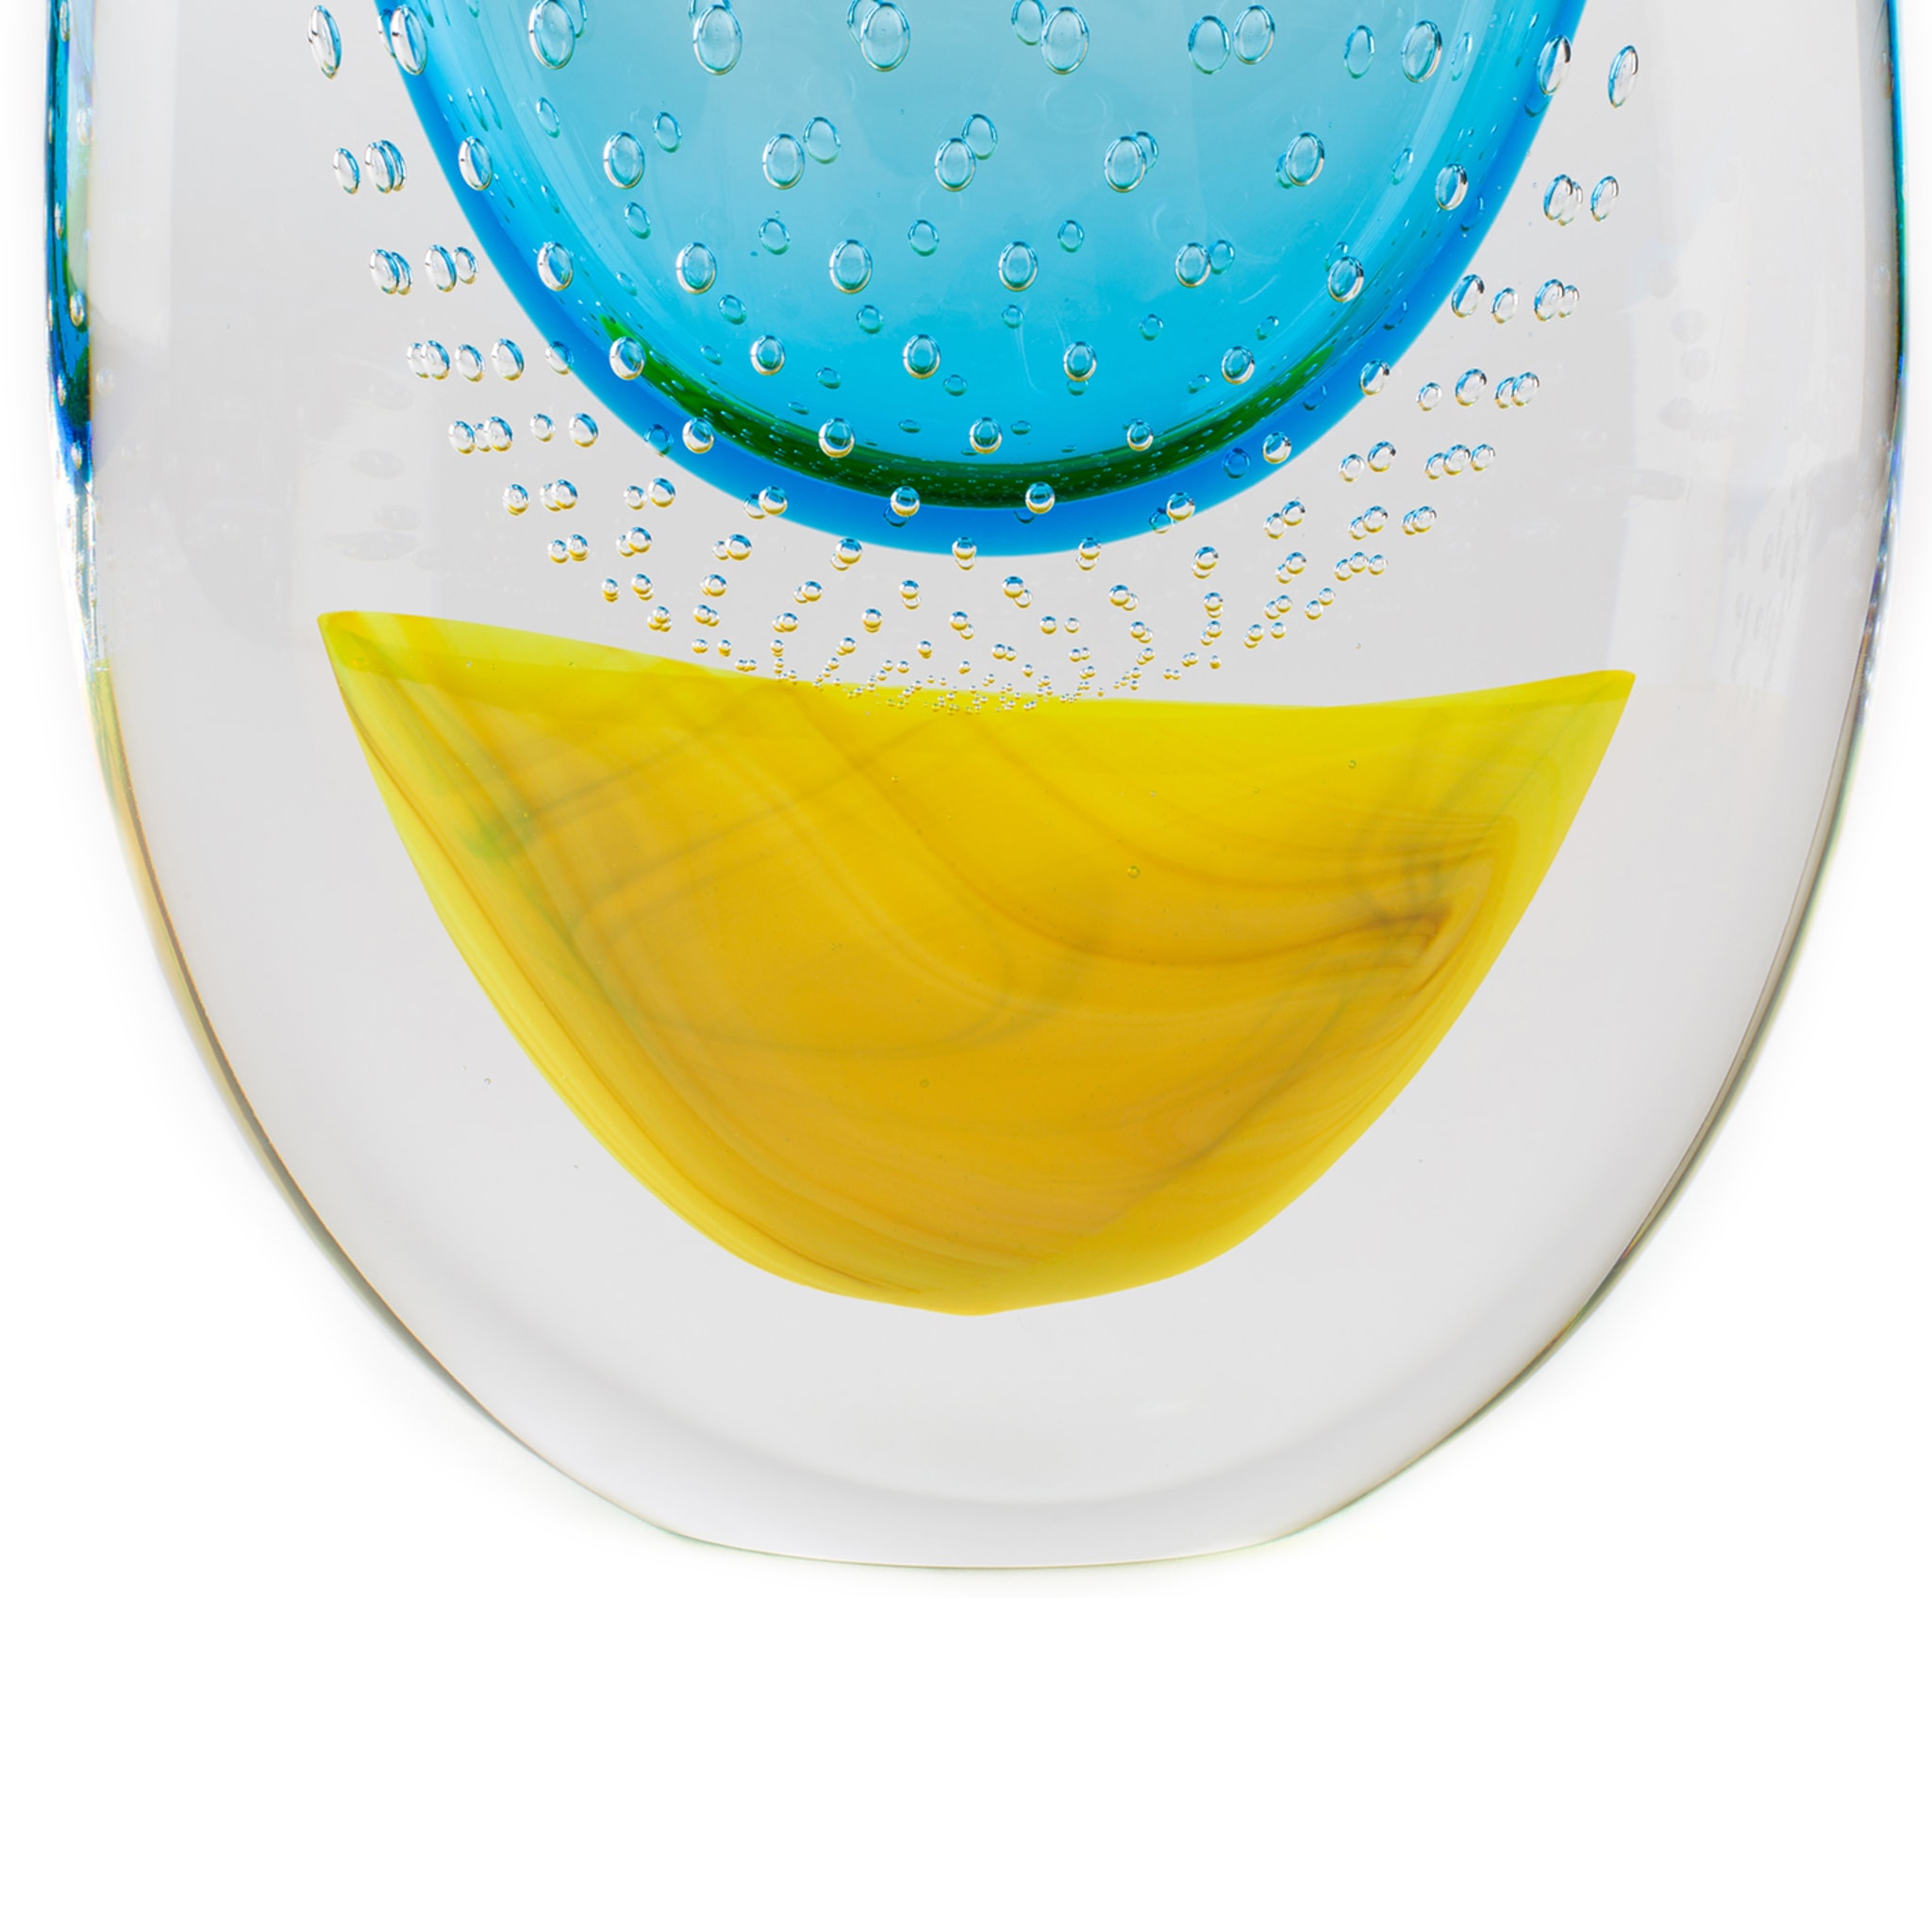 Vrmbicolr Light-Blue and Yellow Vase - Alternative view 4